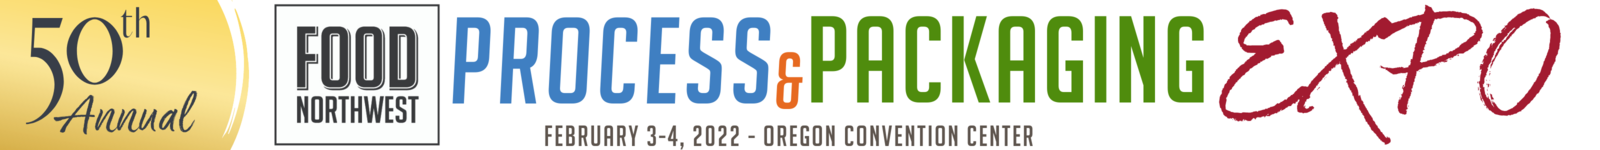 Food Northwest Process & Packaging Expo logo